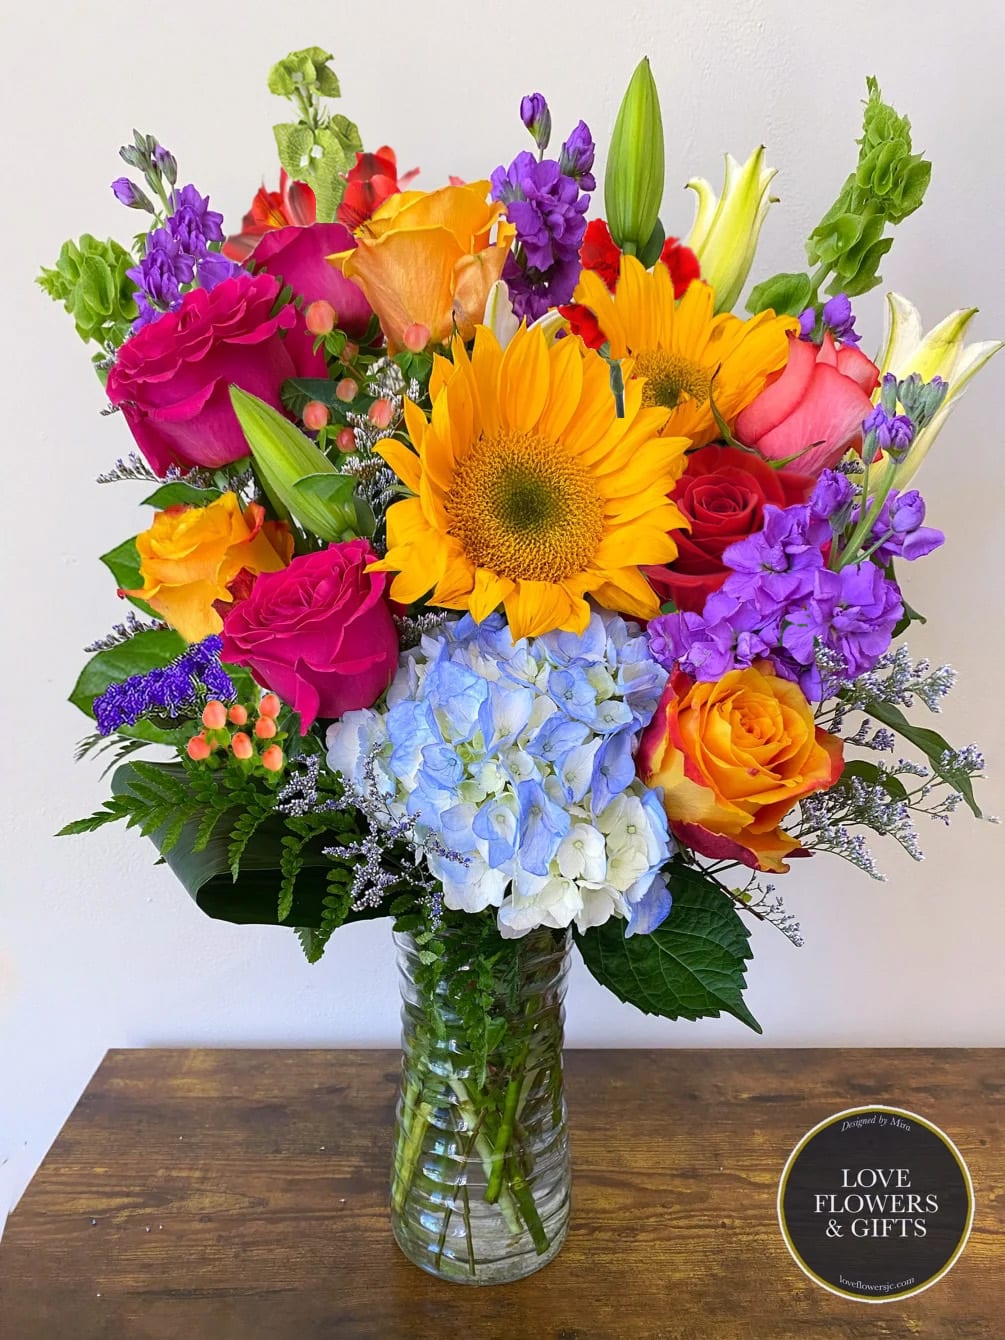 A beautiful, bright, and, colorful arrangement designed in a high-quality tall glass